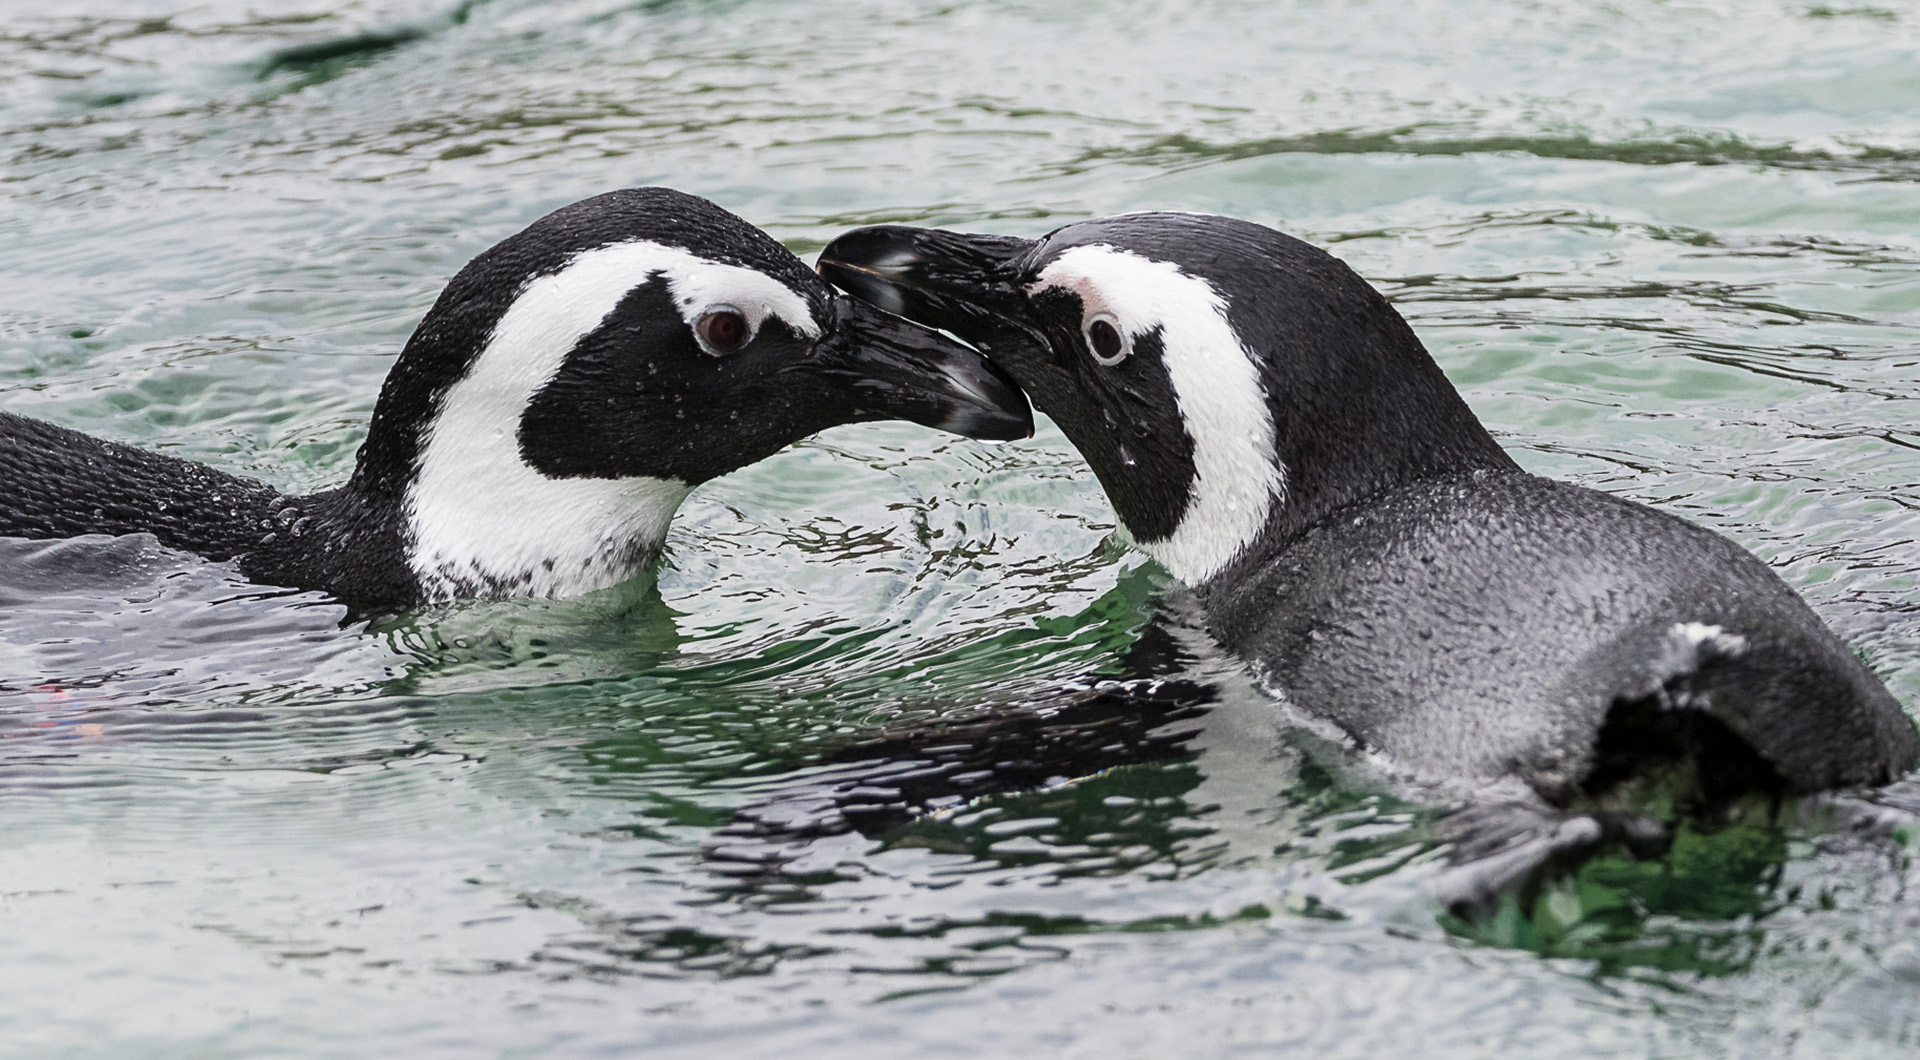 Two African penguins facing each other with beaks touching, swimming in water.